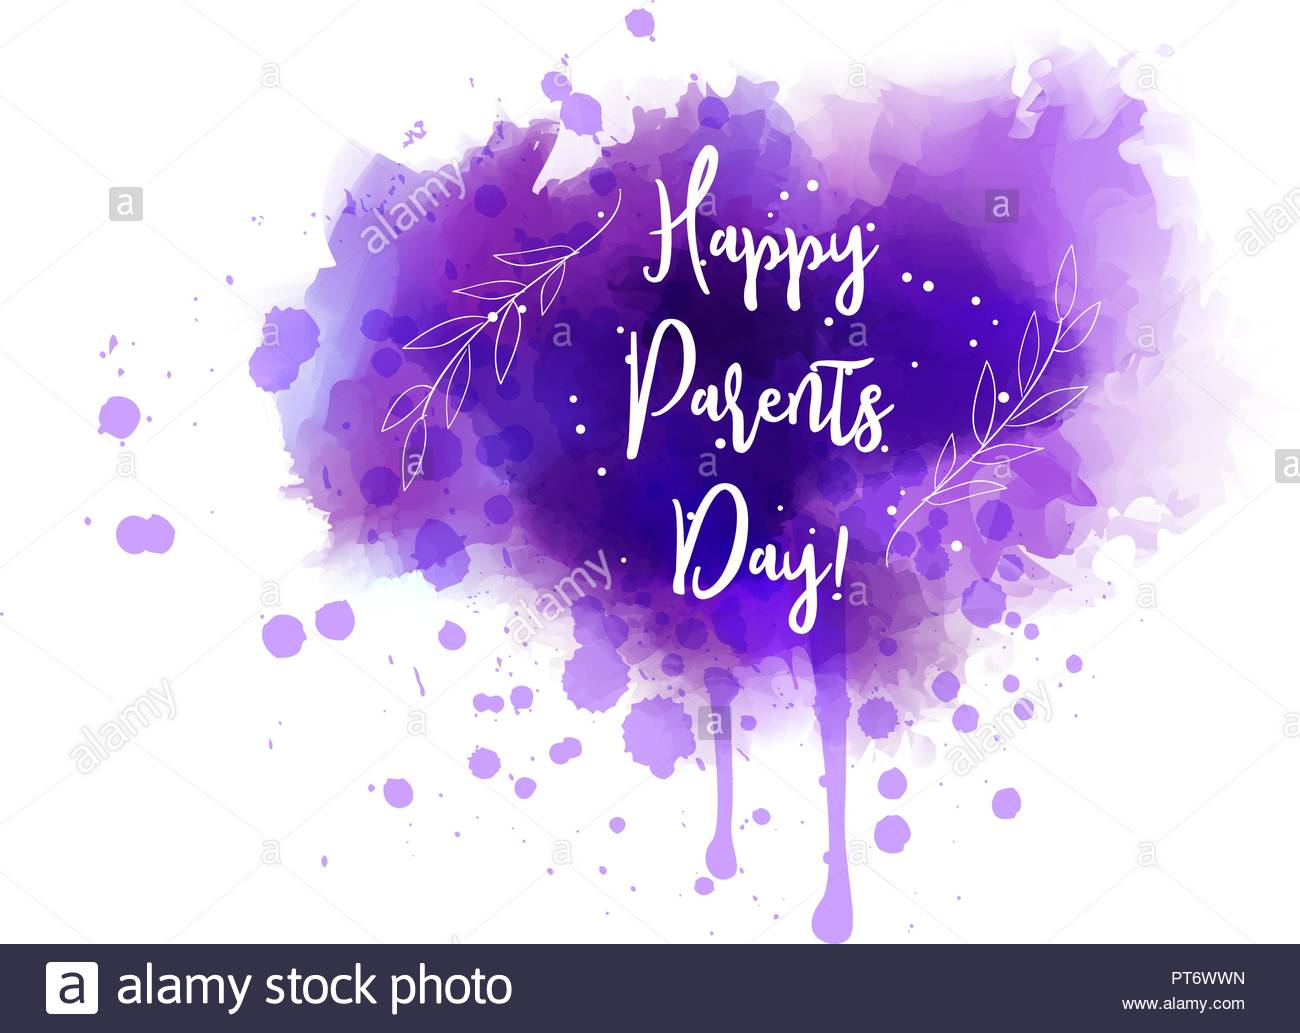 Happy Parents Day Abstract Grunge Watercolor Background Holiday